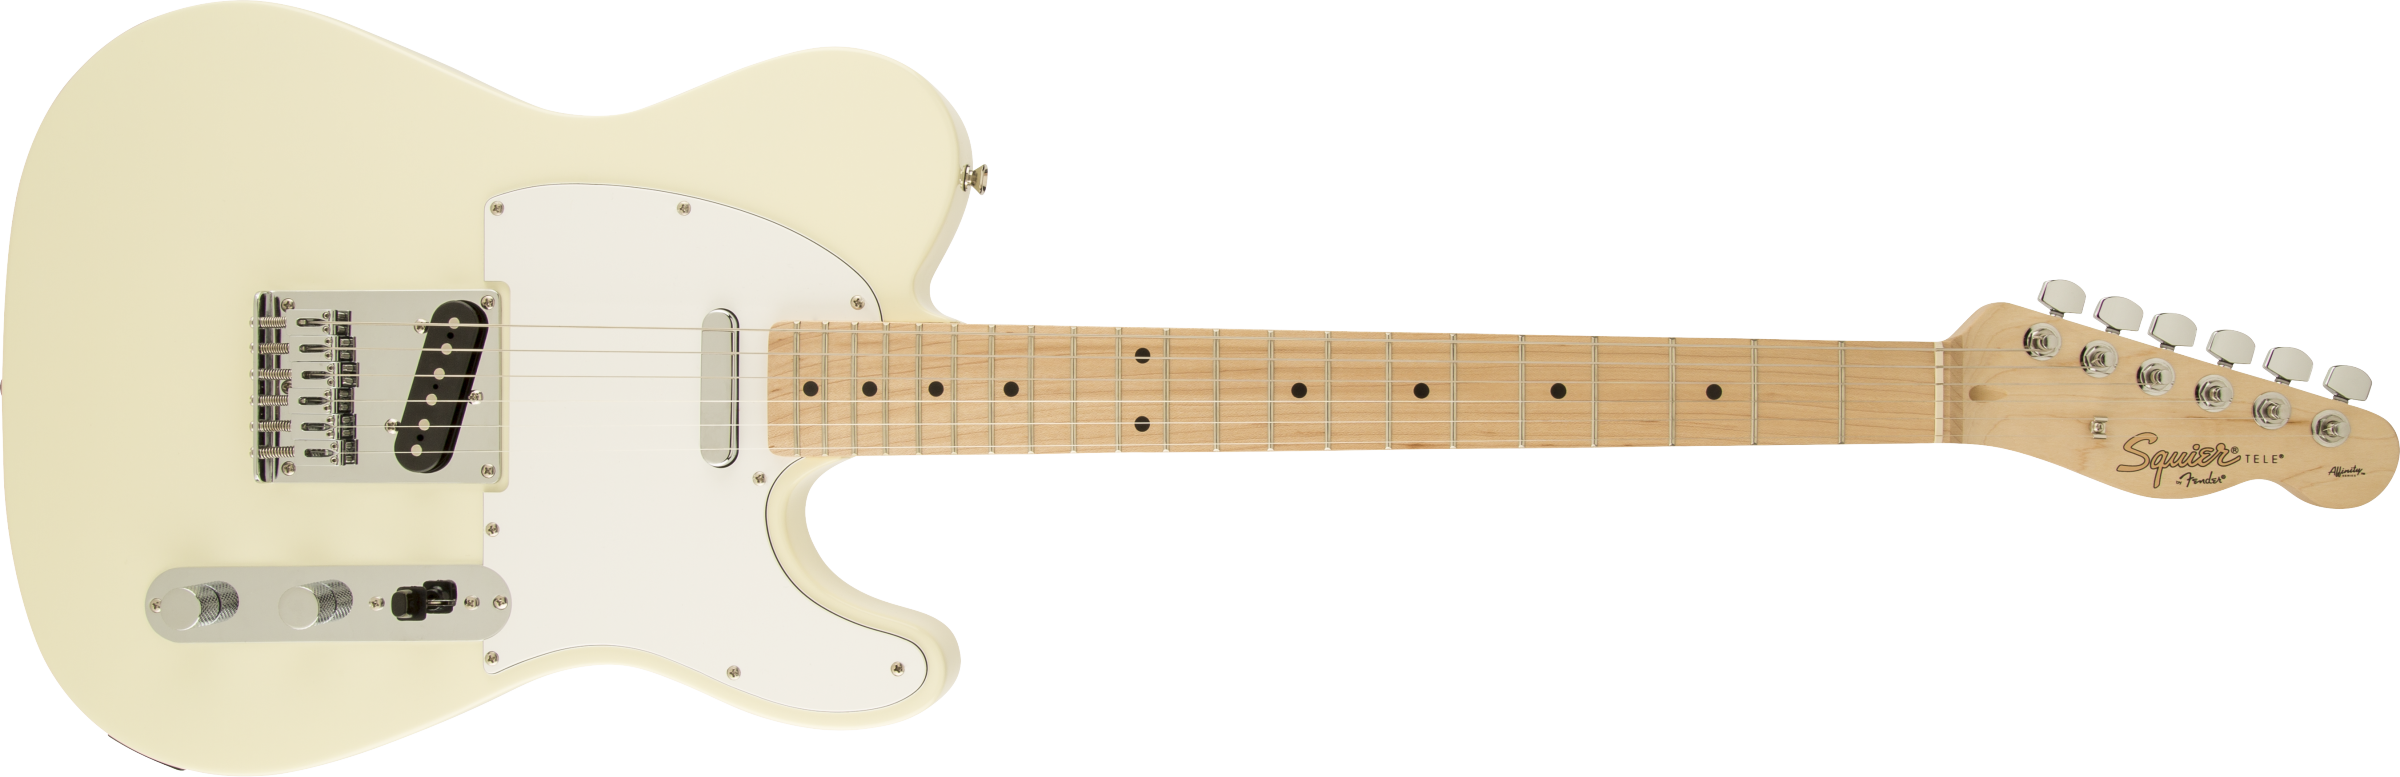 Squier Affinity Series™ Telecaster®, Maple Fingerboard, Arctic